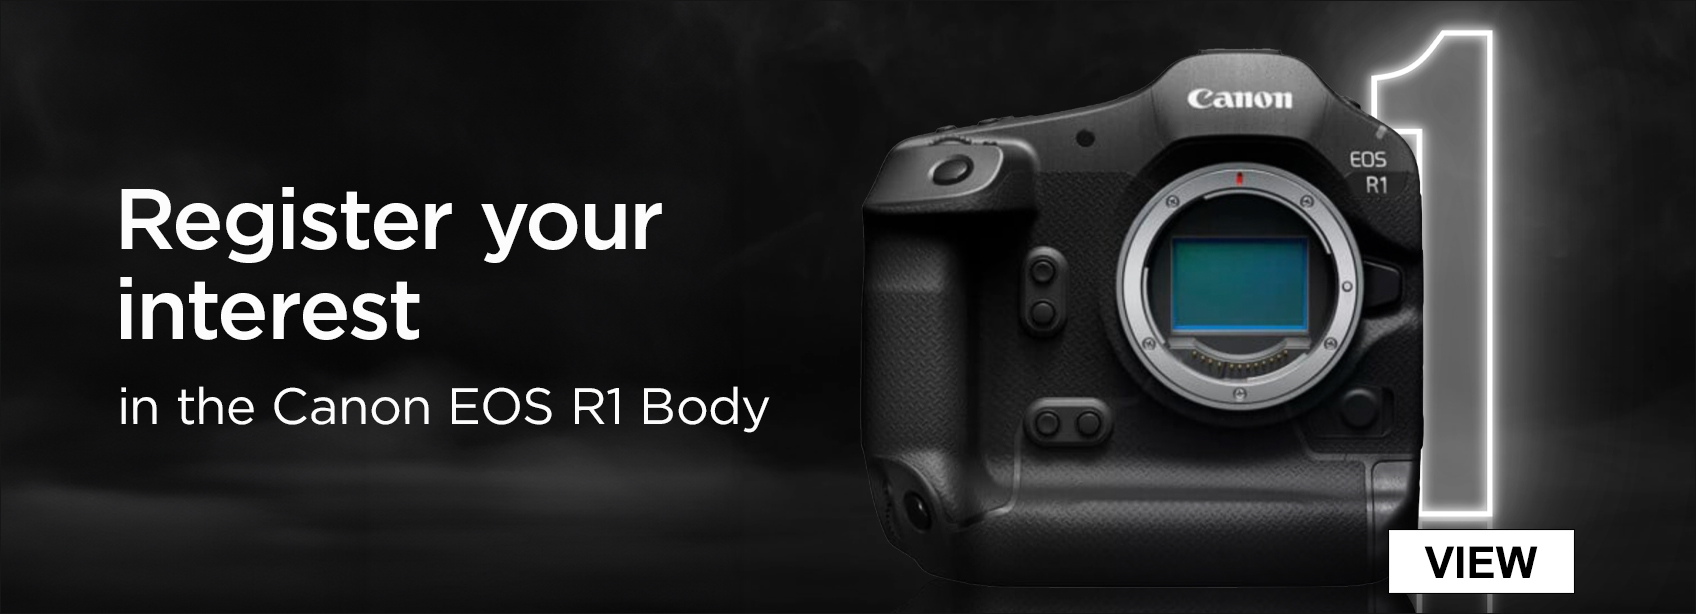 Register Your interest in the Canon EOS R1 Body